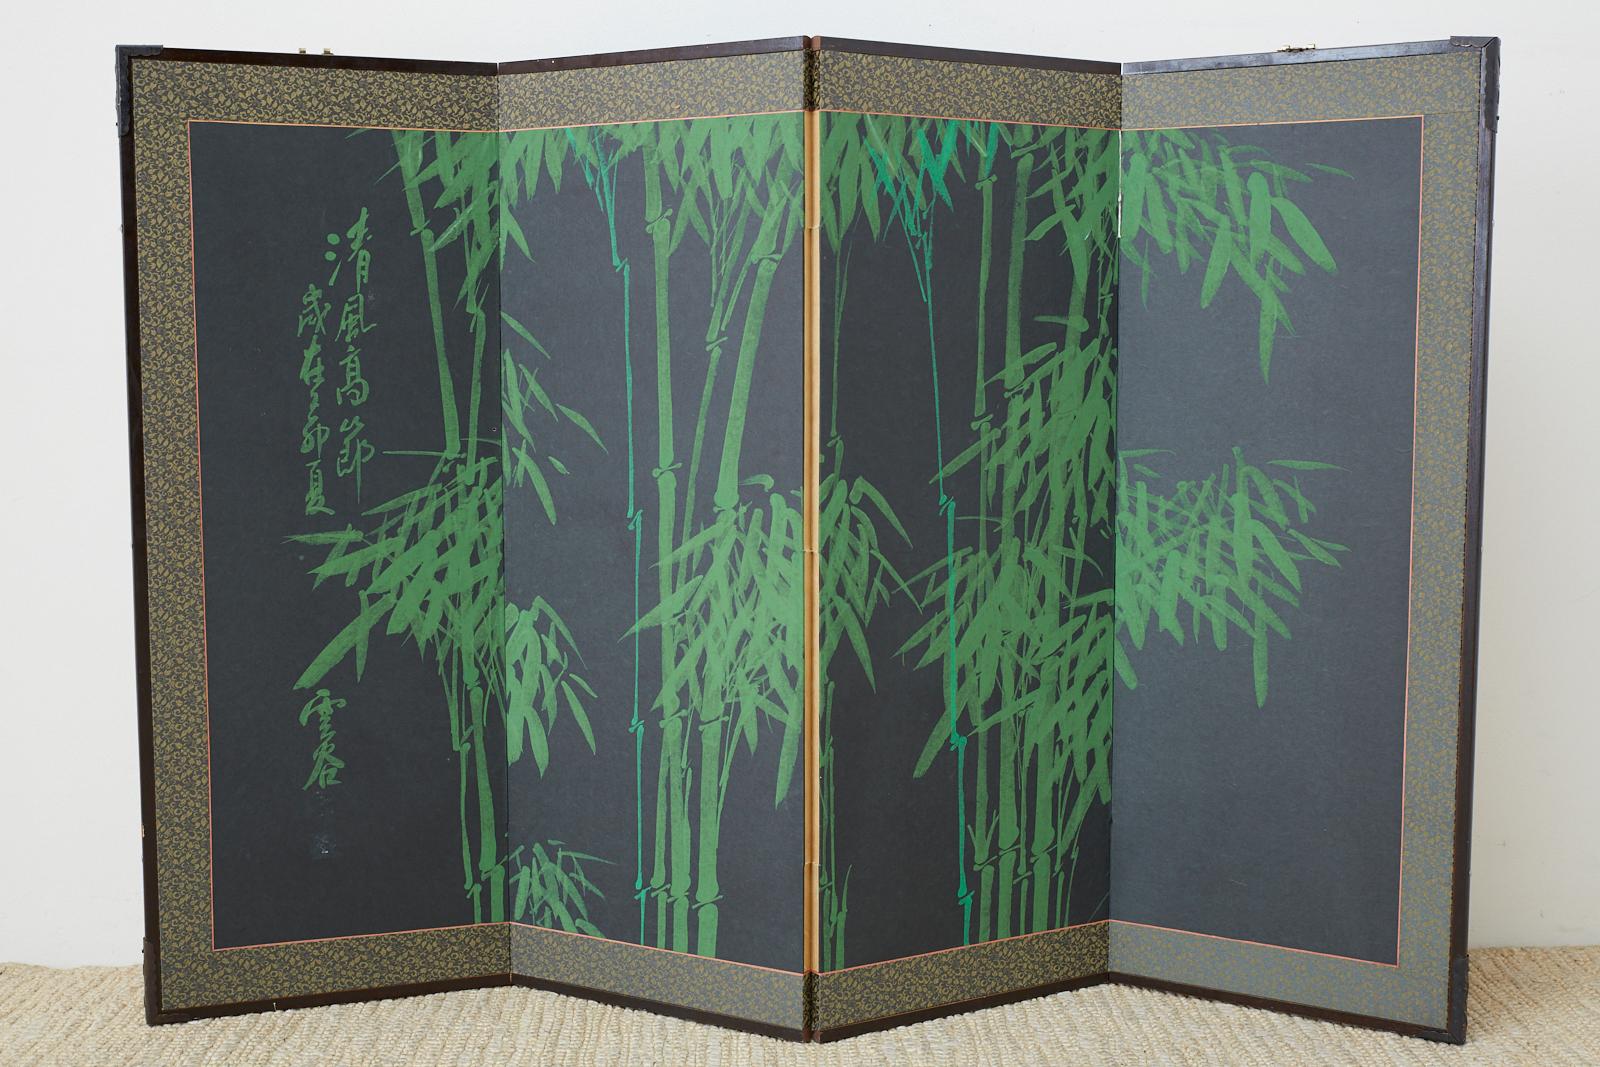 Interesting Japanese four-panel byobu screen of green bamboo stalks over blue dyed paper. Lovely monochromatic style signed Unkoku with date. Set in a lacquered frame with a silk brocade border. From an estate in San Francisco, CA.